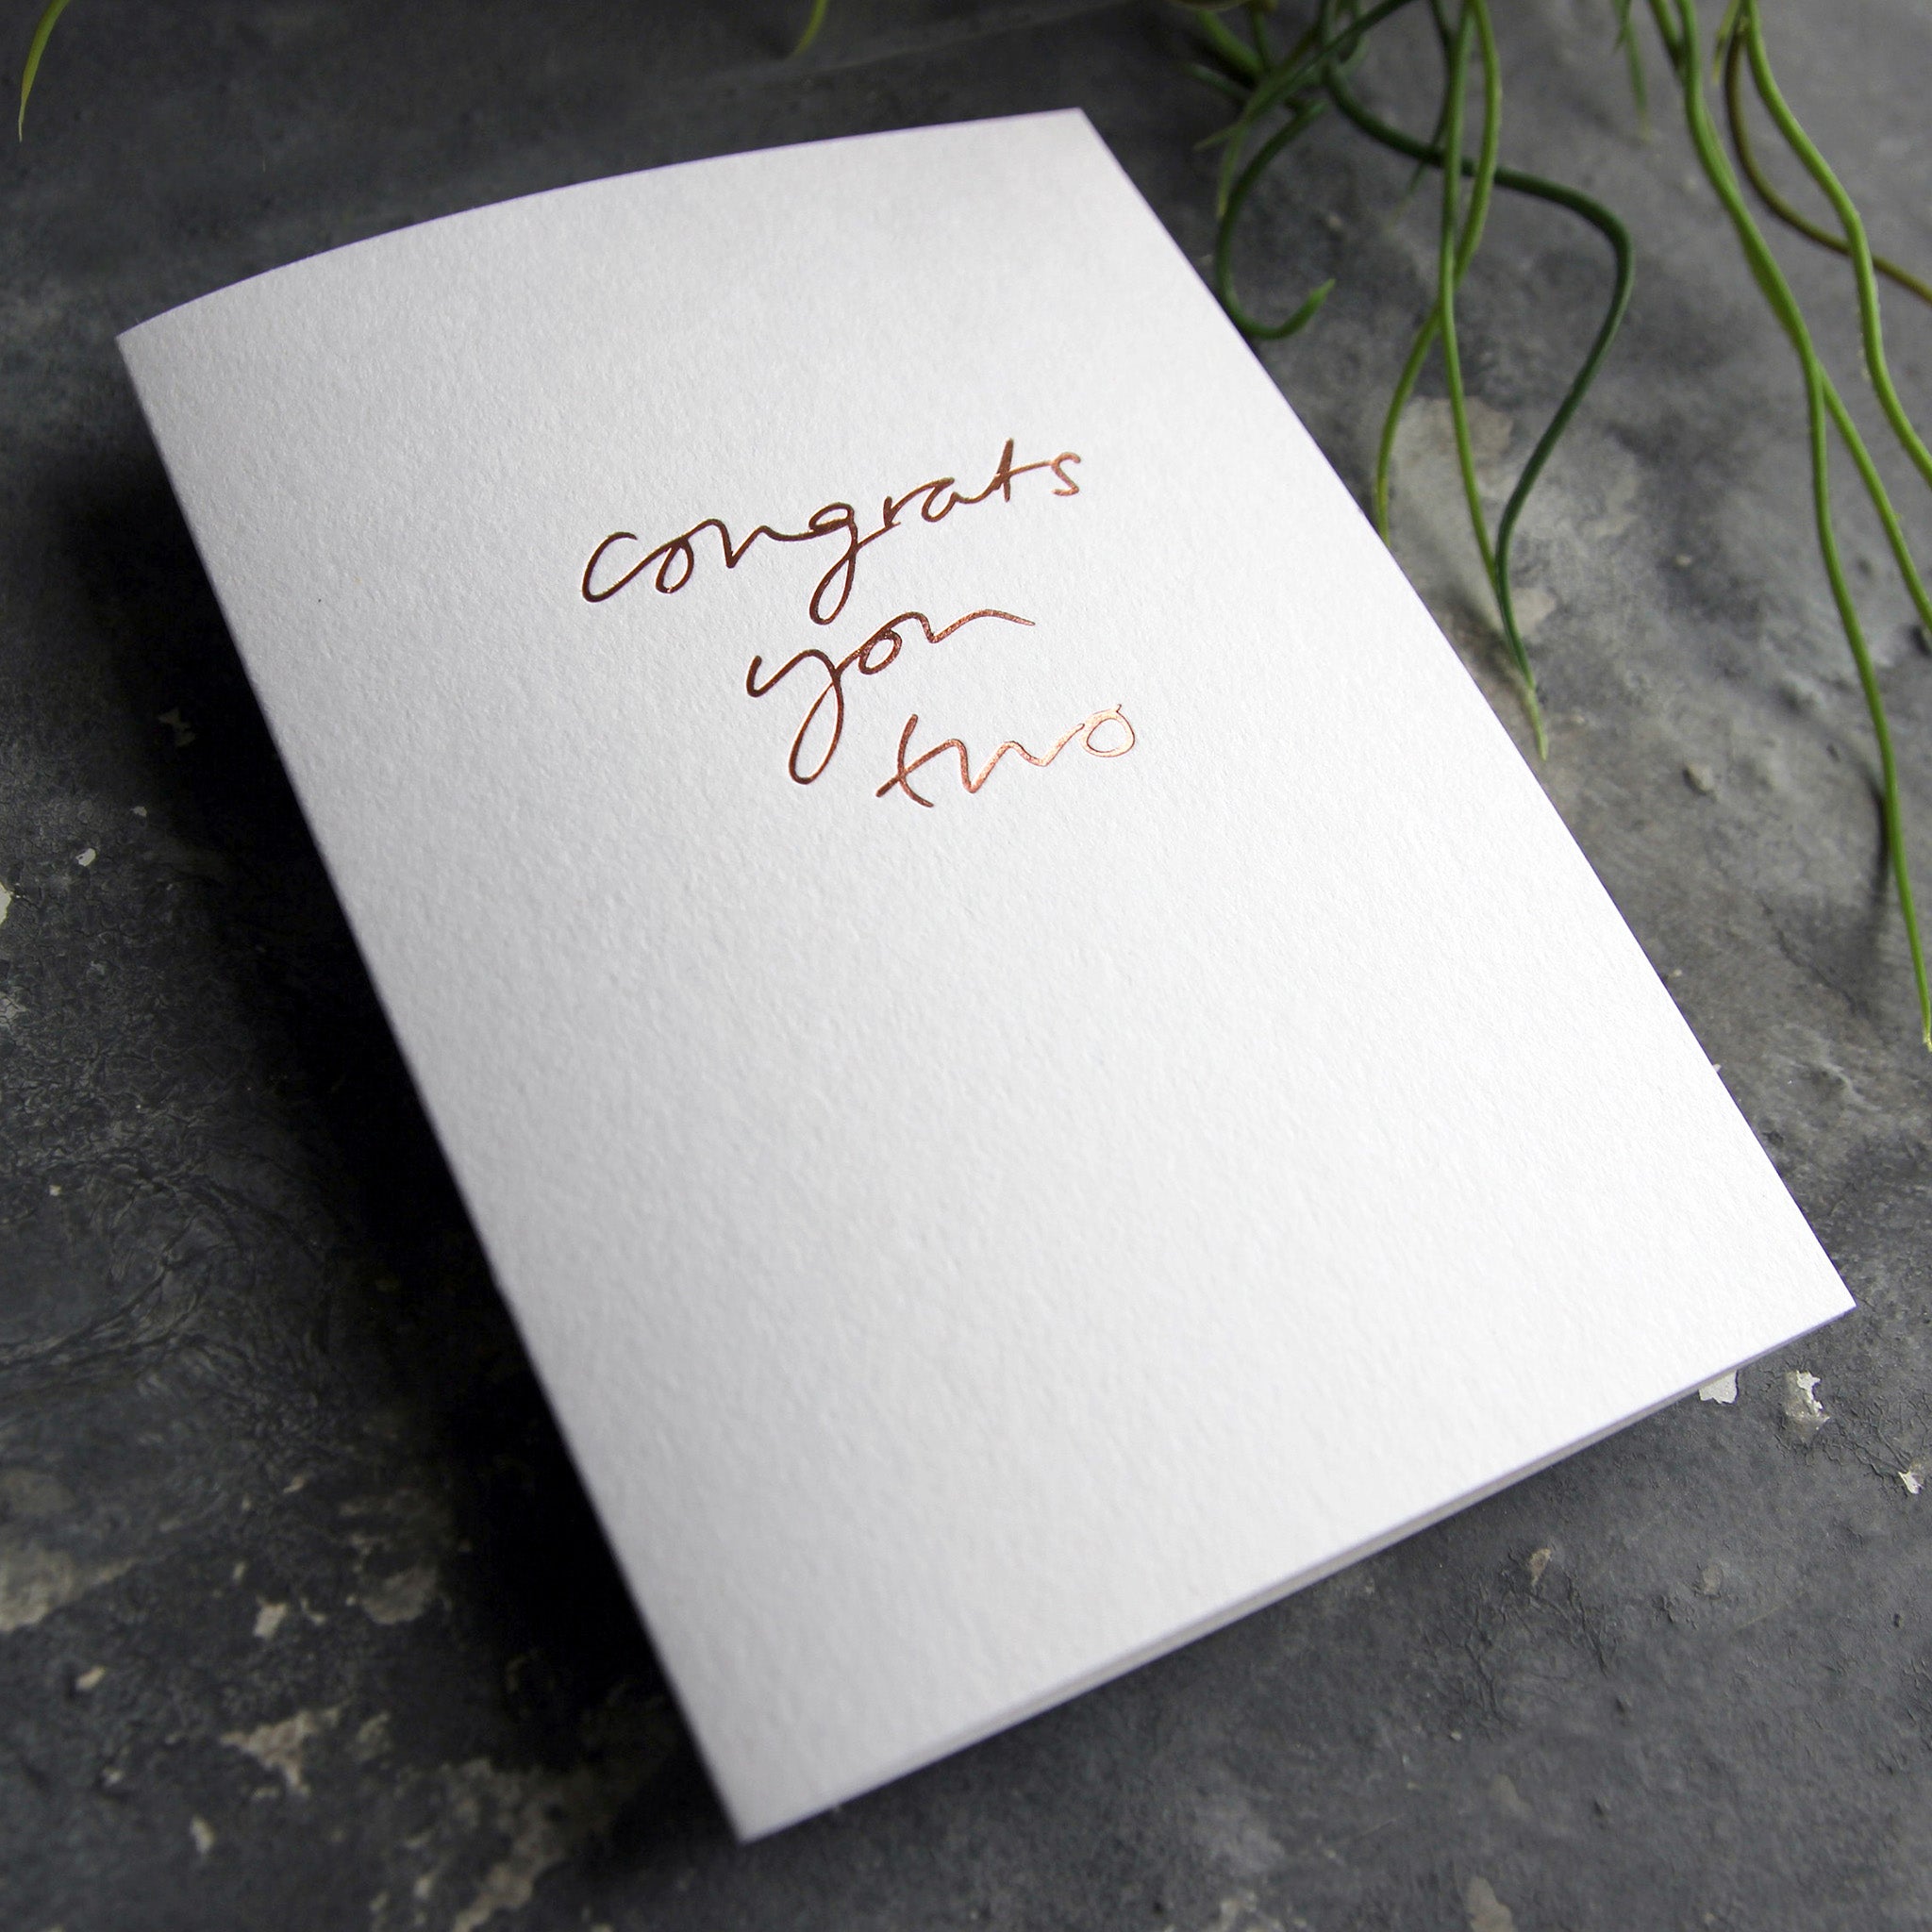 Luxury white greetings card with "Congrats You Two' handwritten in the front and hand printed in rose gold foil on a grey background with some green plant leaves at the side.